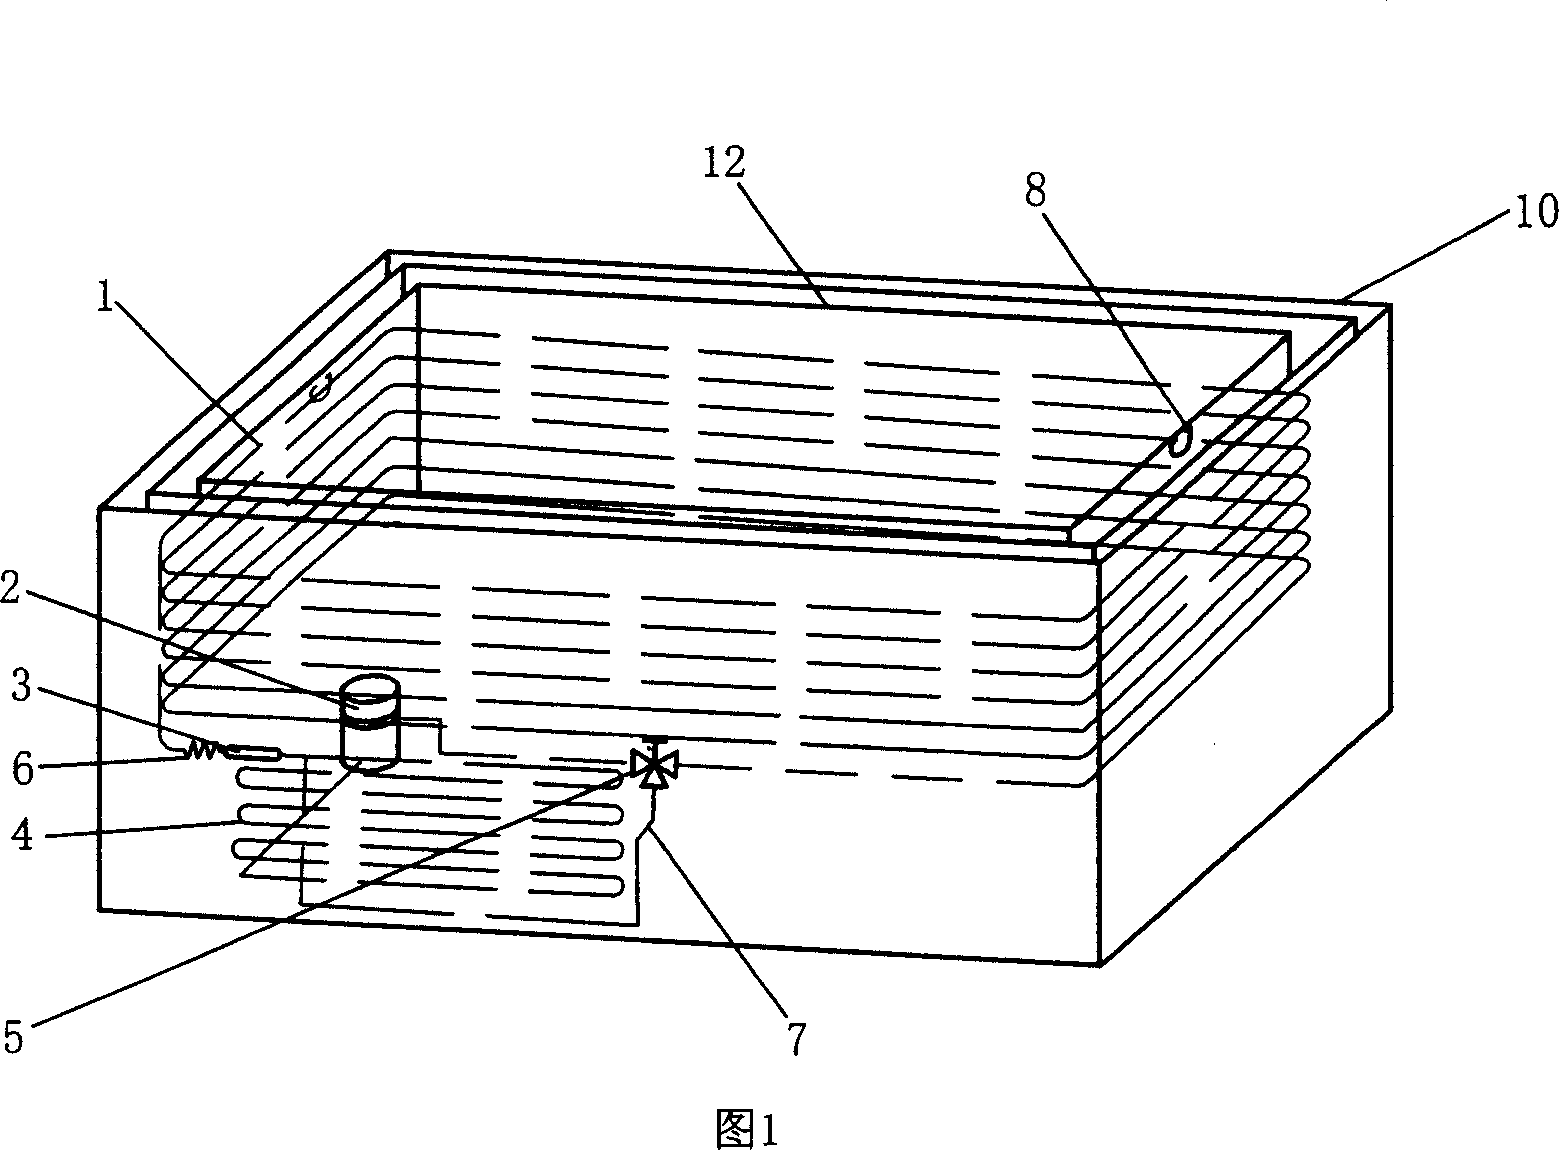 Horizontal freezer with defrost function